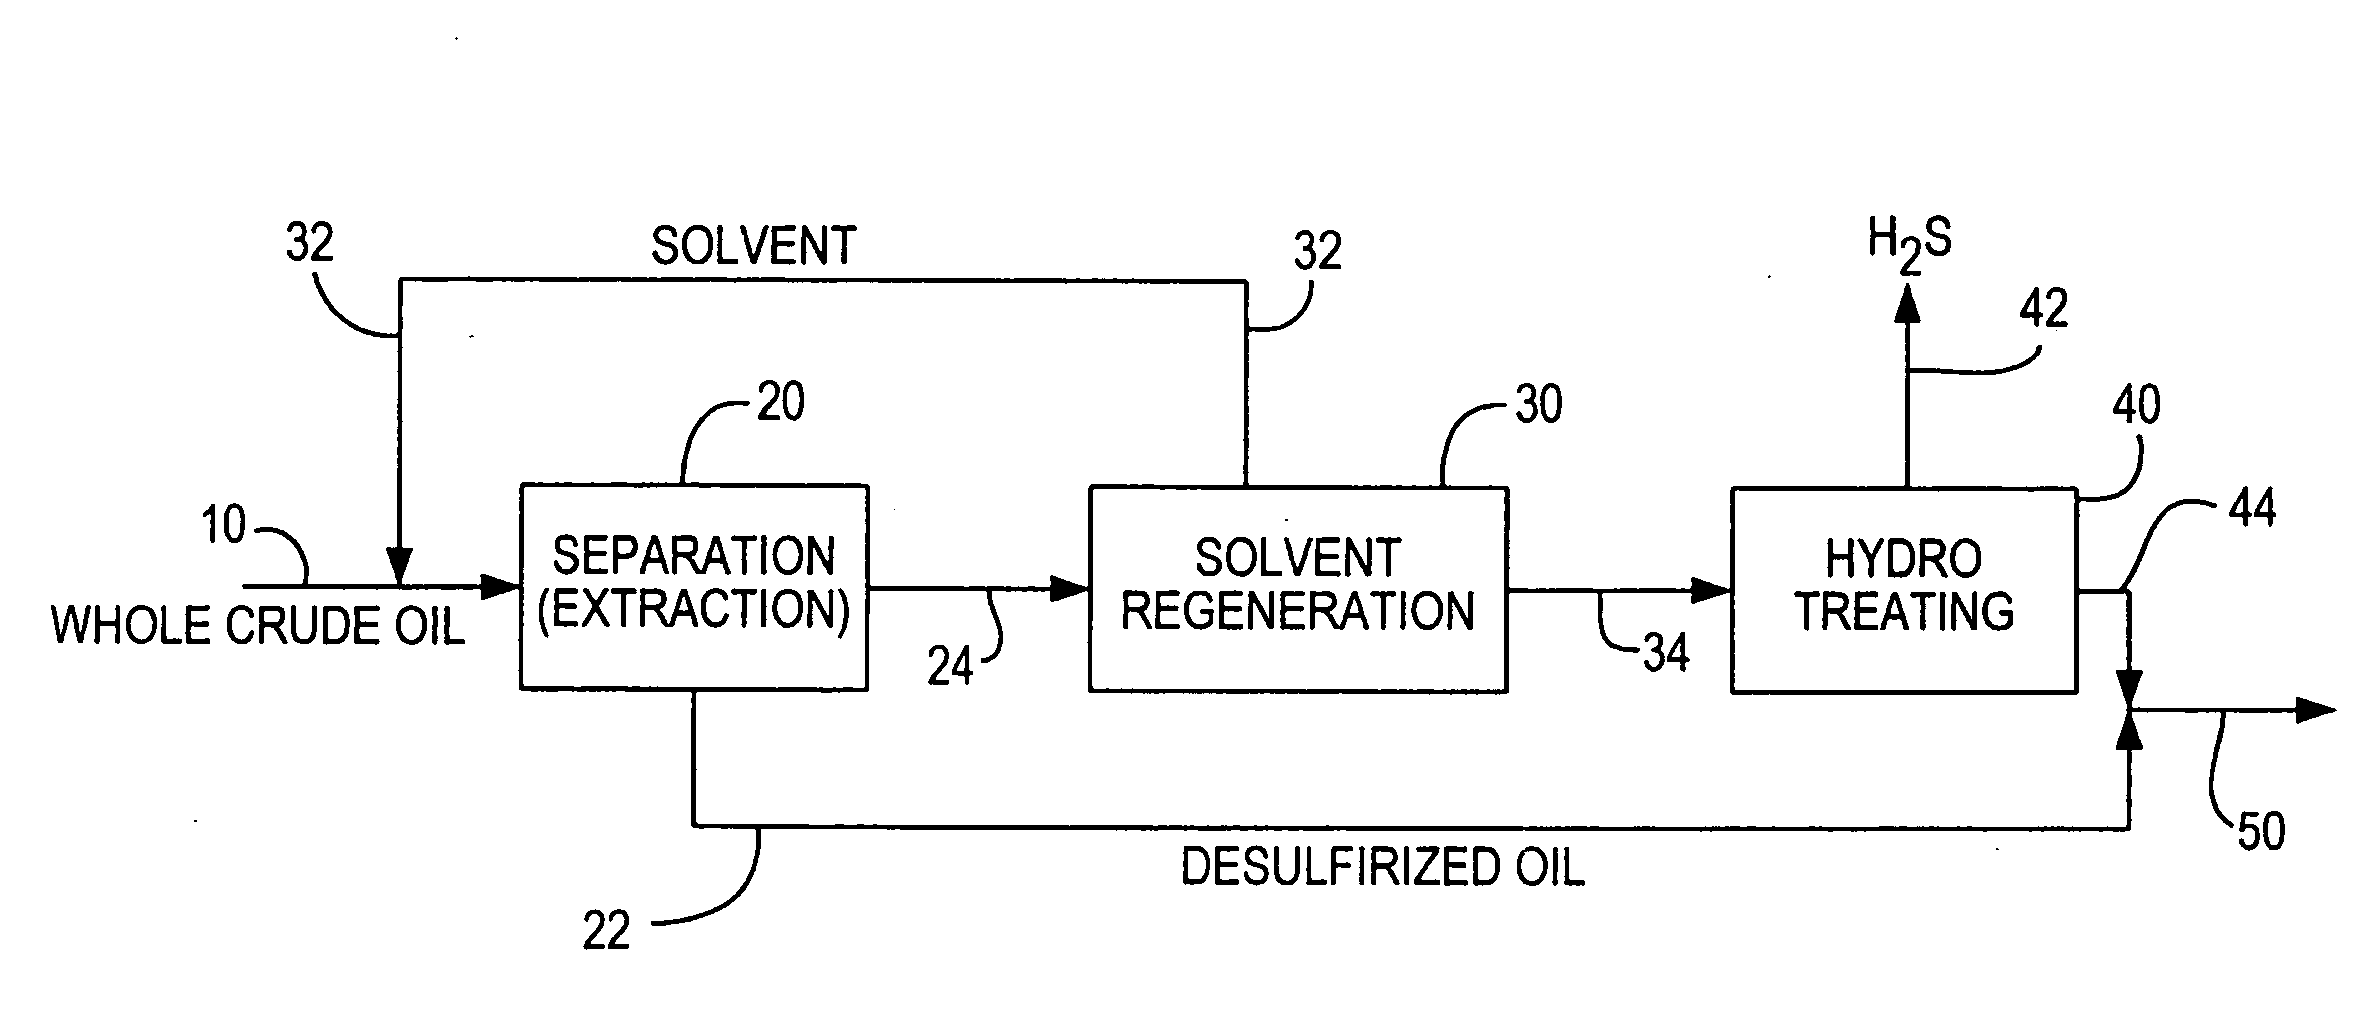 Desulfurization of whole crude oil by solvent extraction and hydrotreating